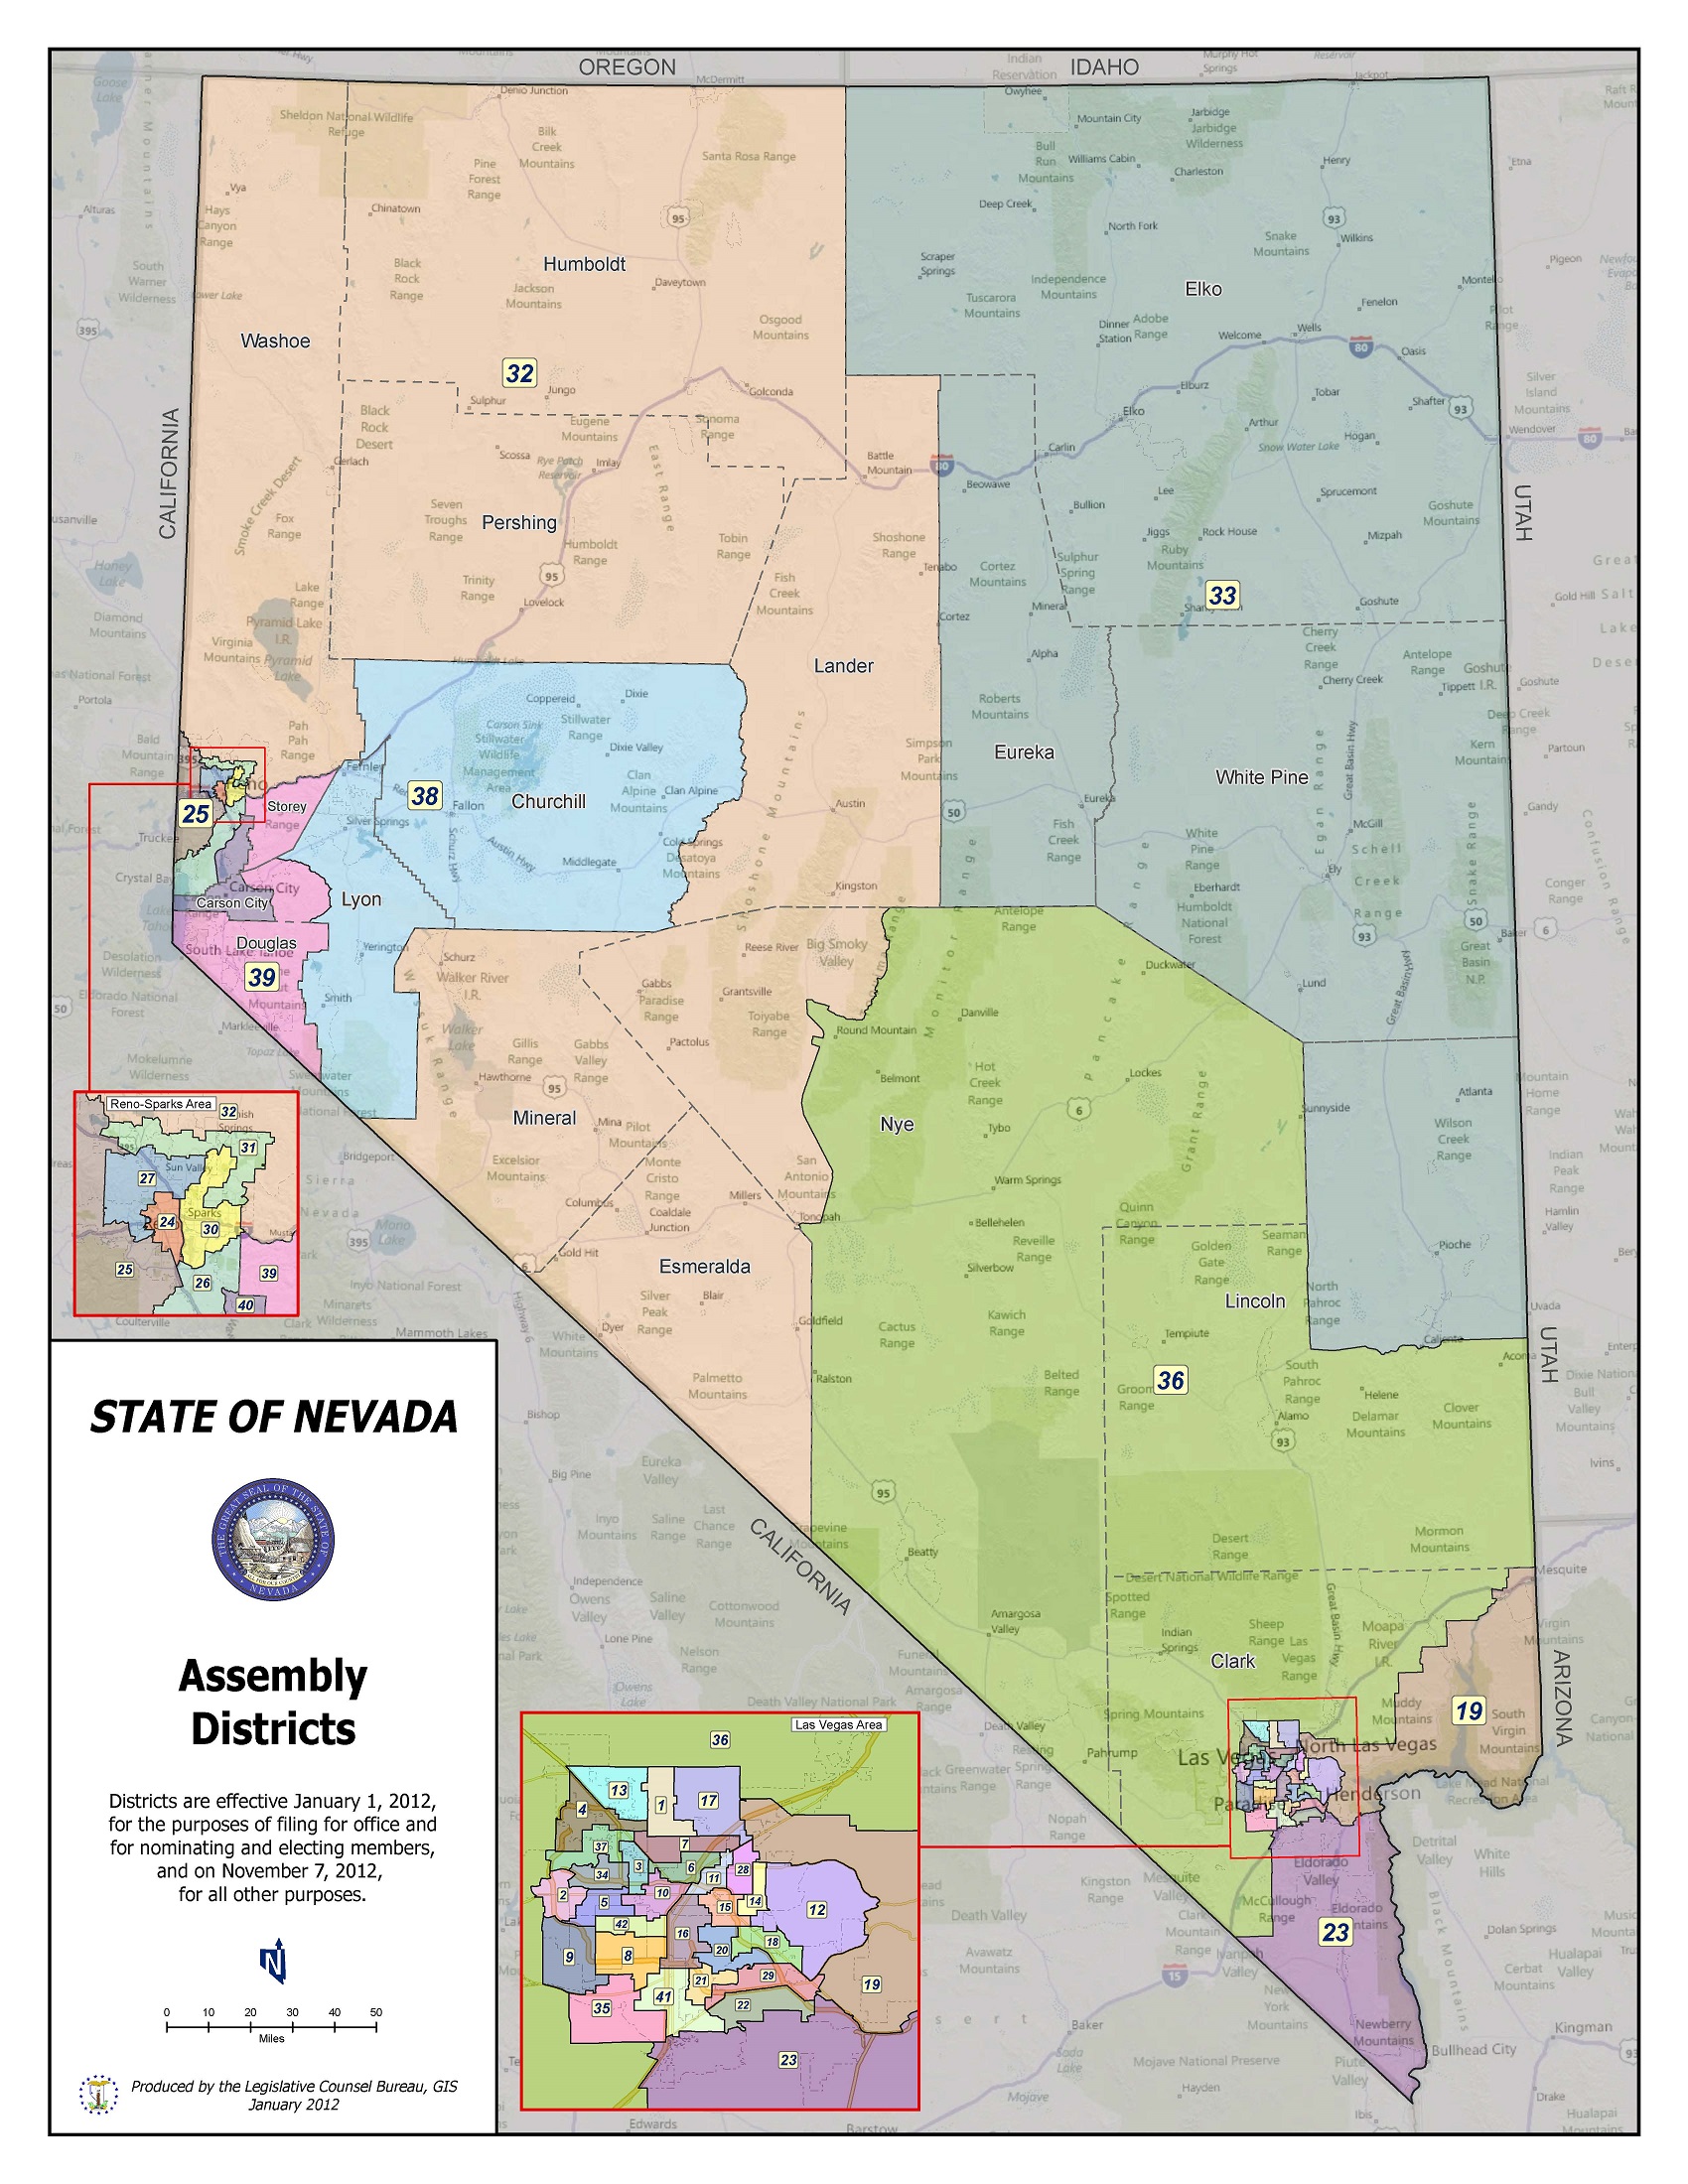 State redistricting information for Nevada